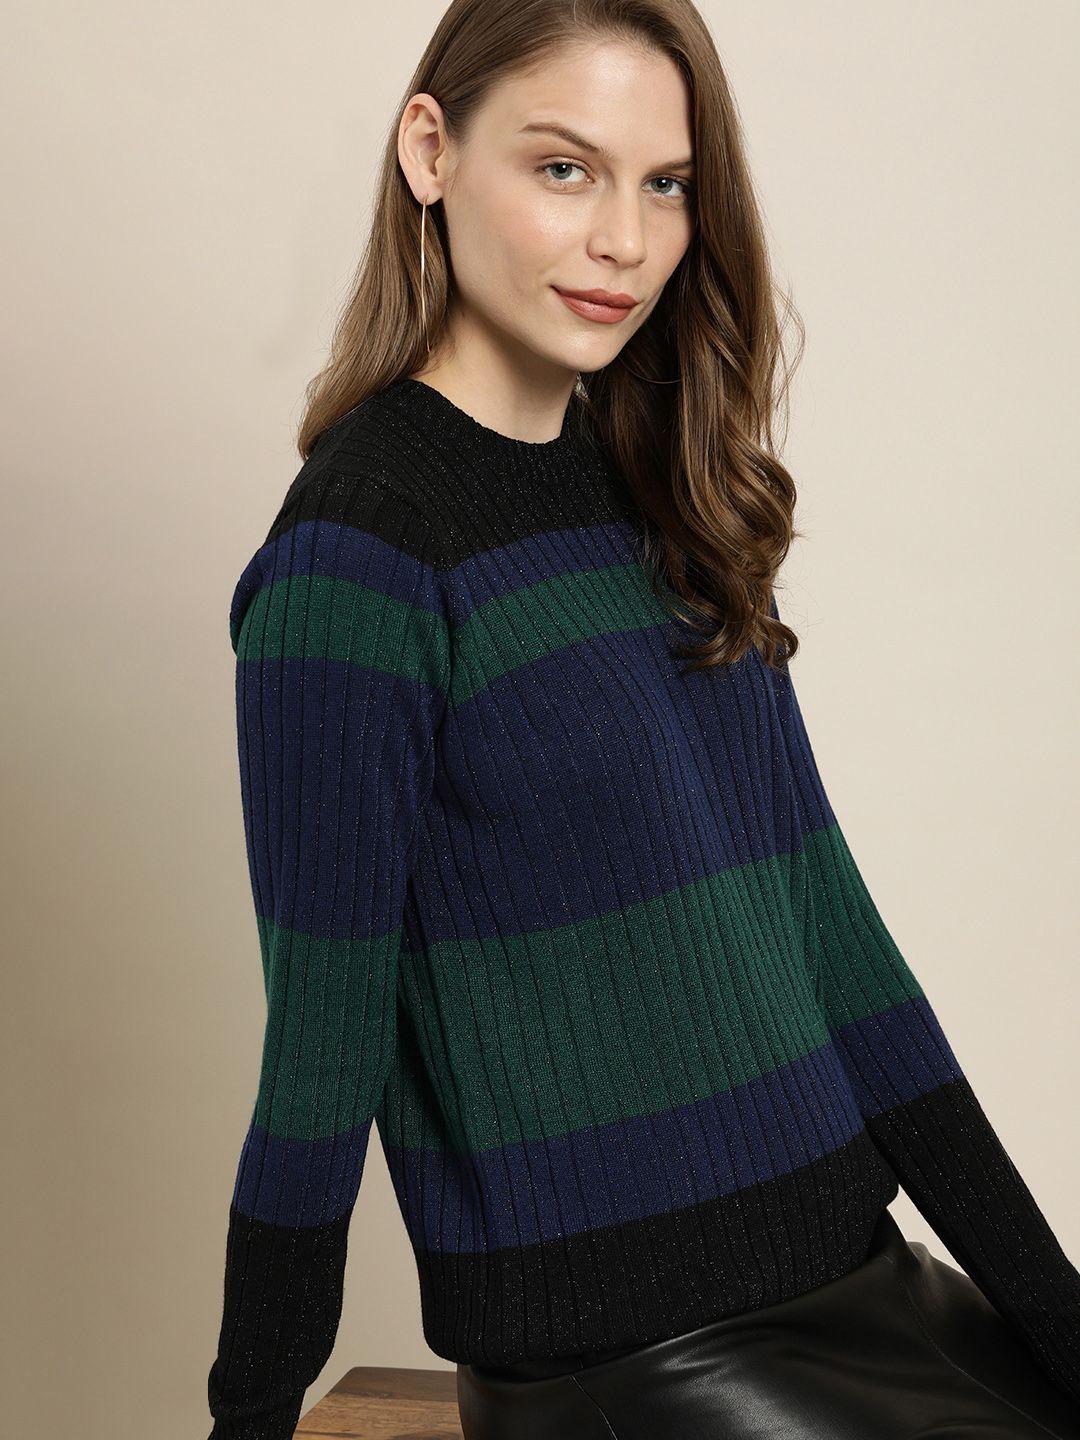 her by invictus women navy & black striped sweater with shimmer effect